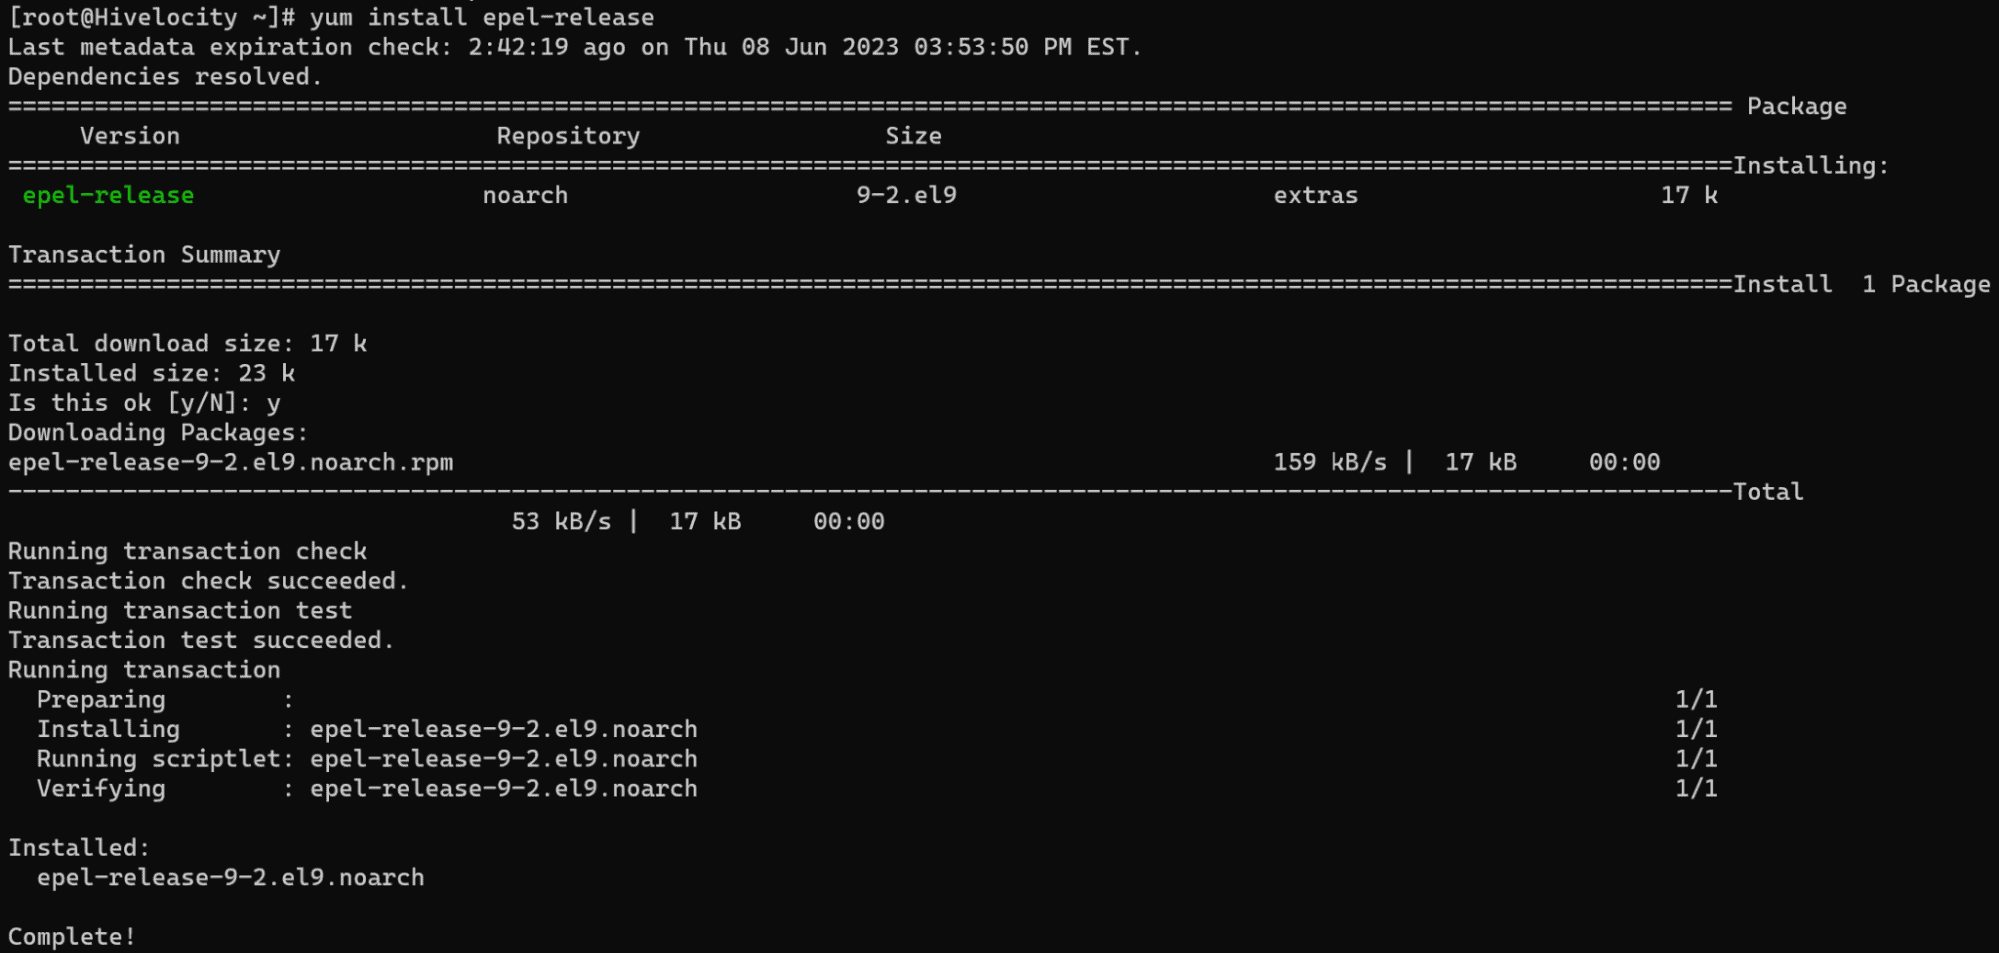 Screenshot showing the result of the yum install epel-release command.